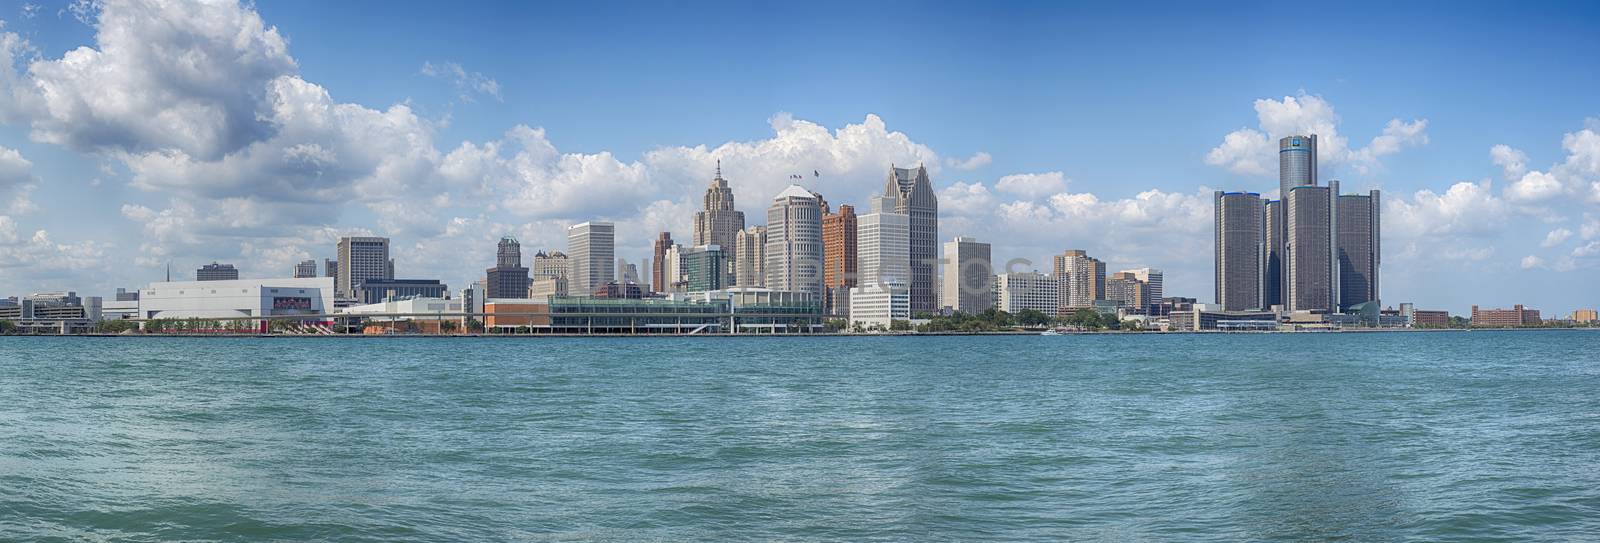 Panoramic view of Detroit oskyline from Windsor, Ontario.